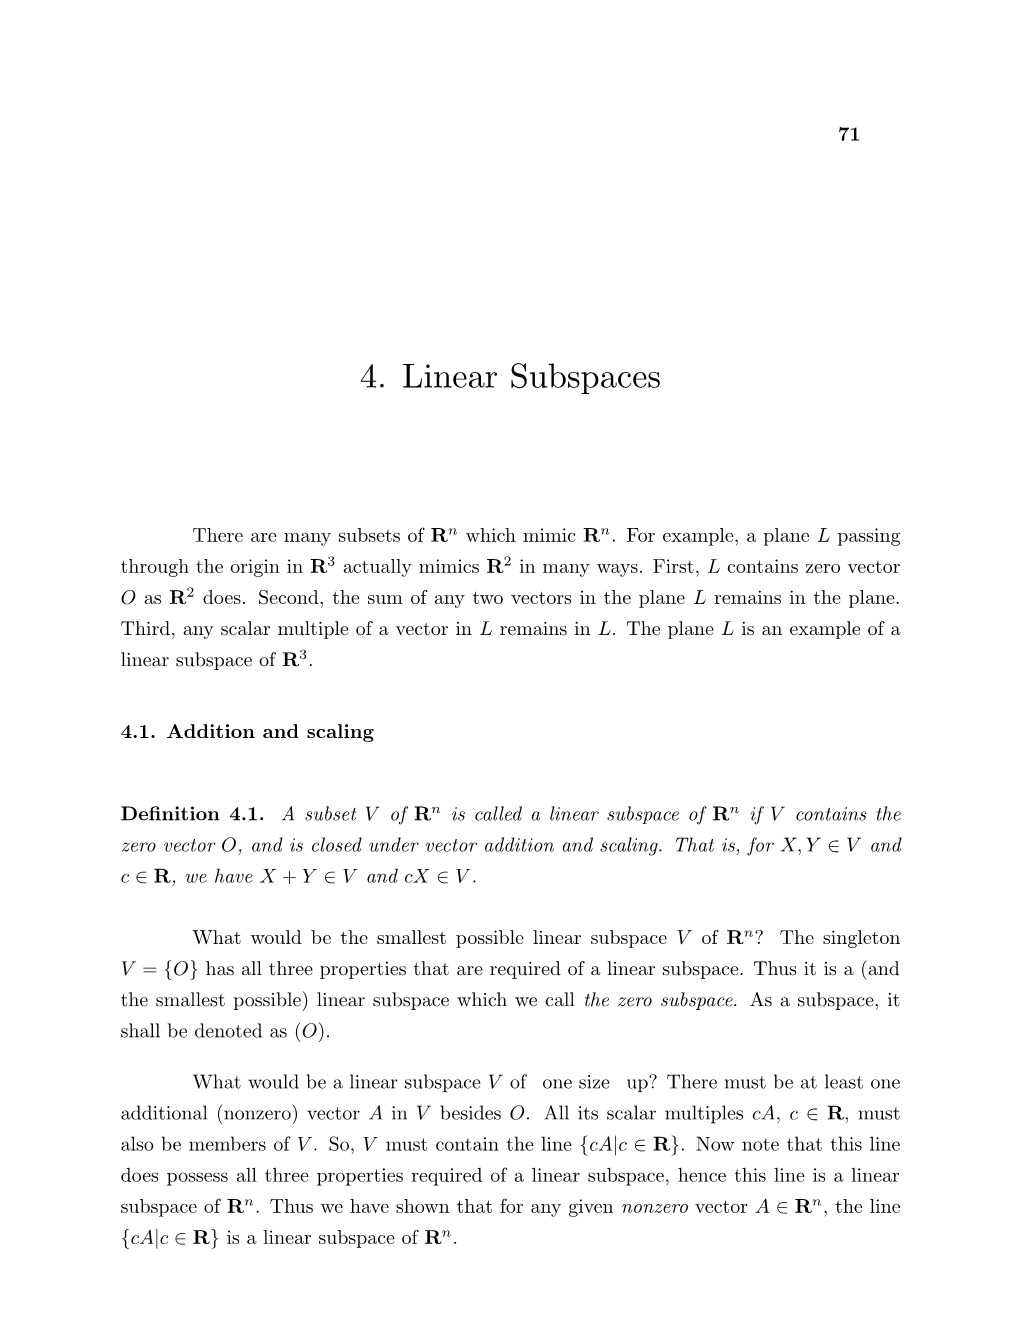 4. Linear Subspaces